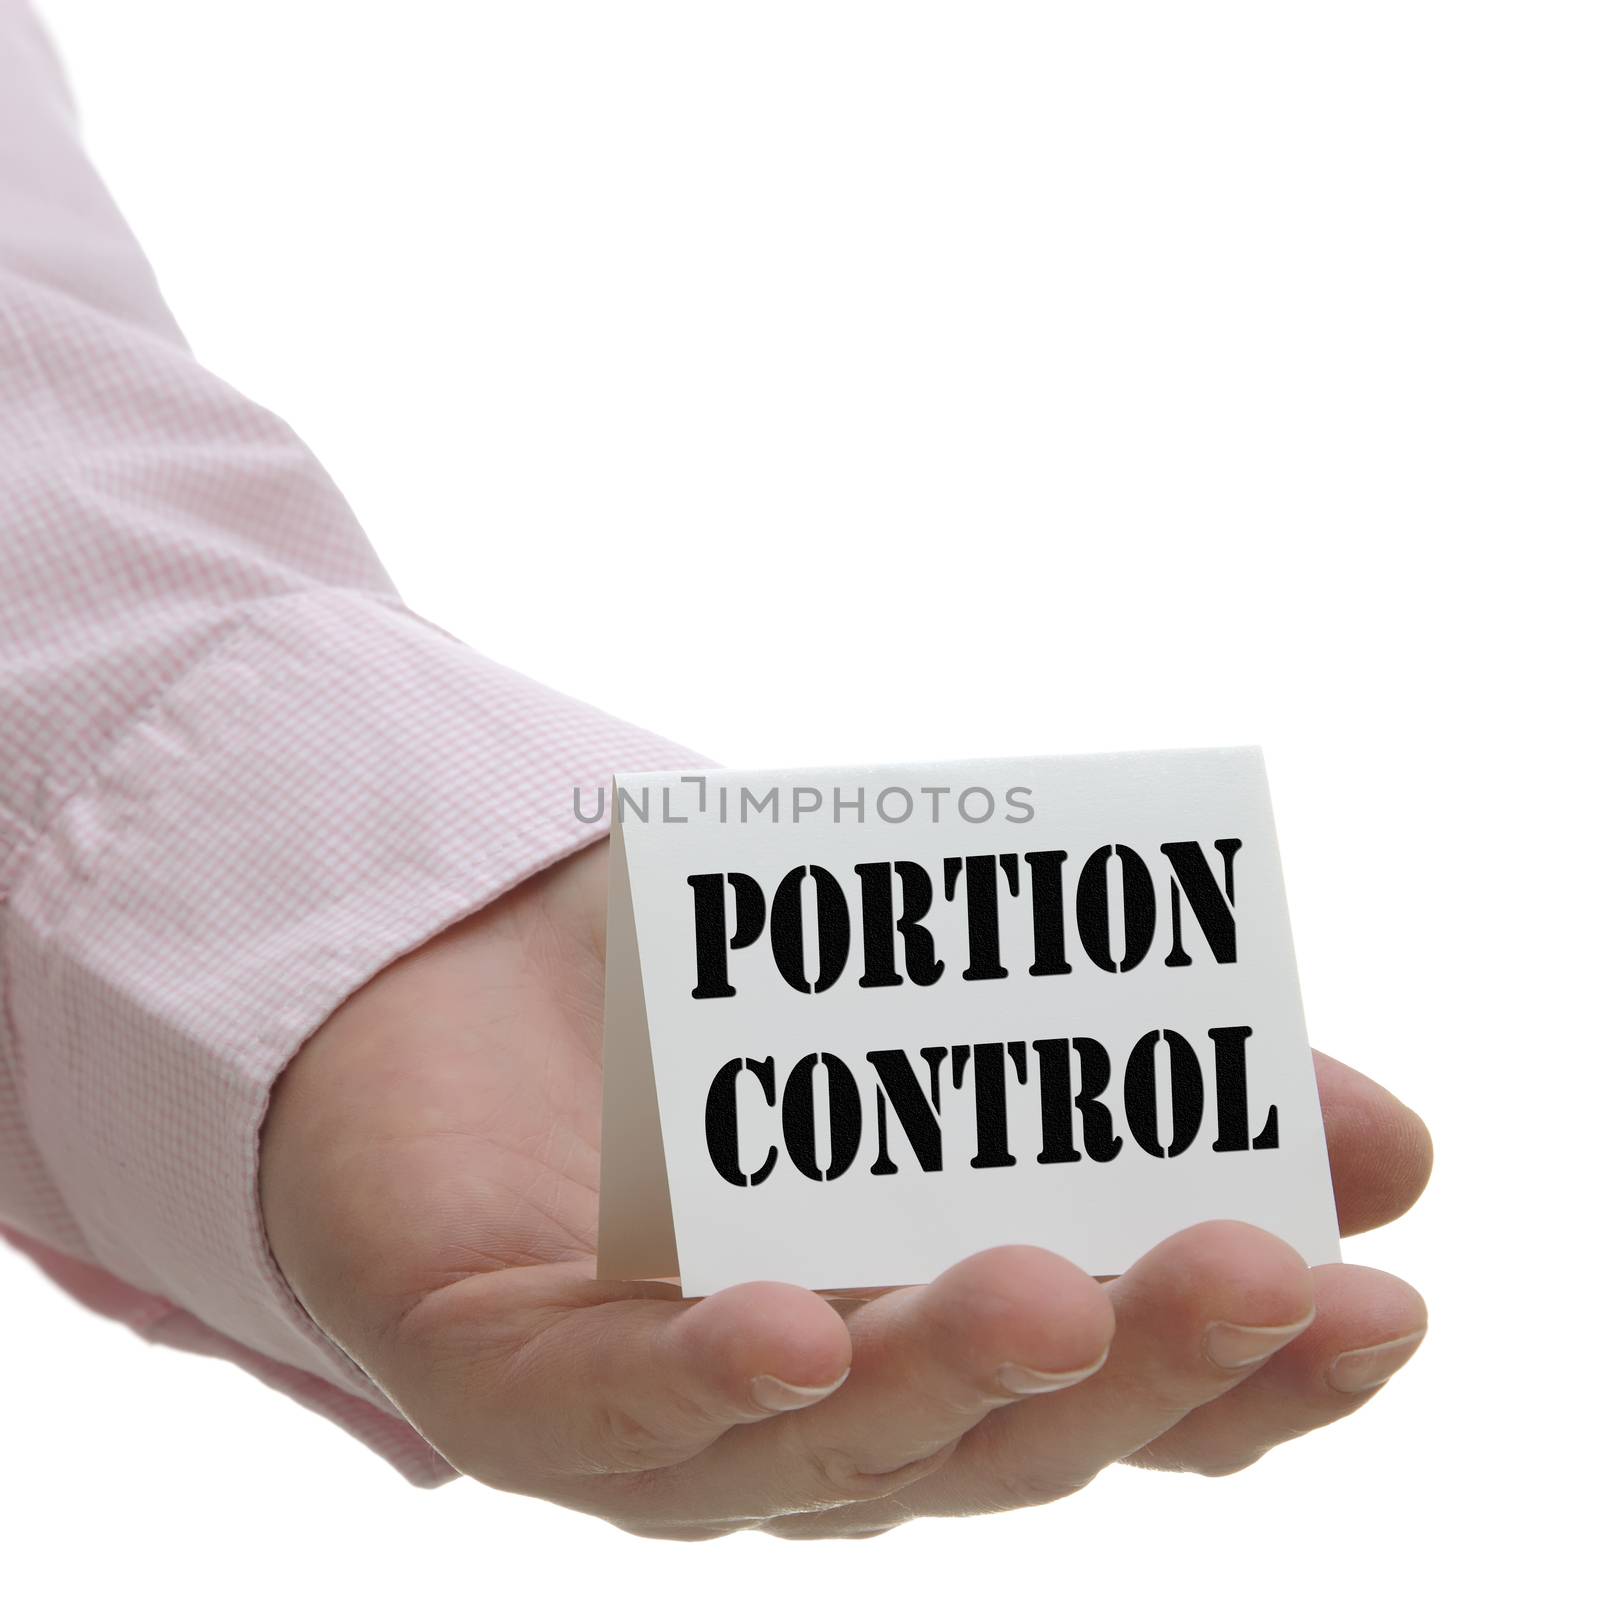 Business people holding portion control sign